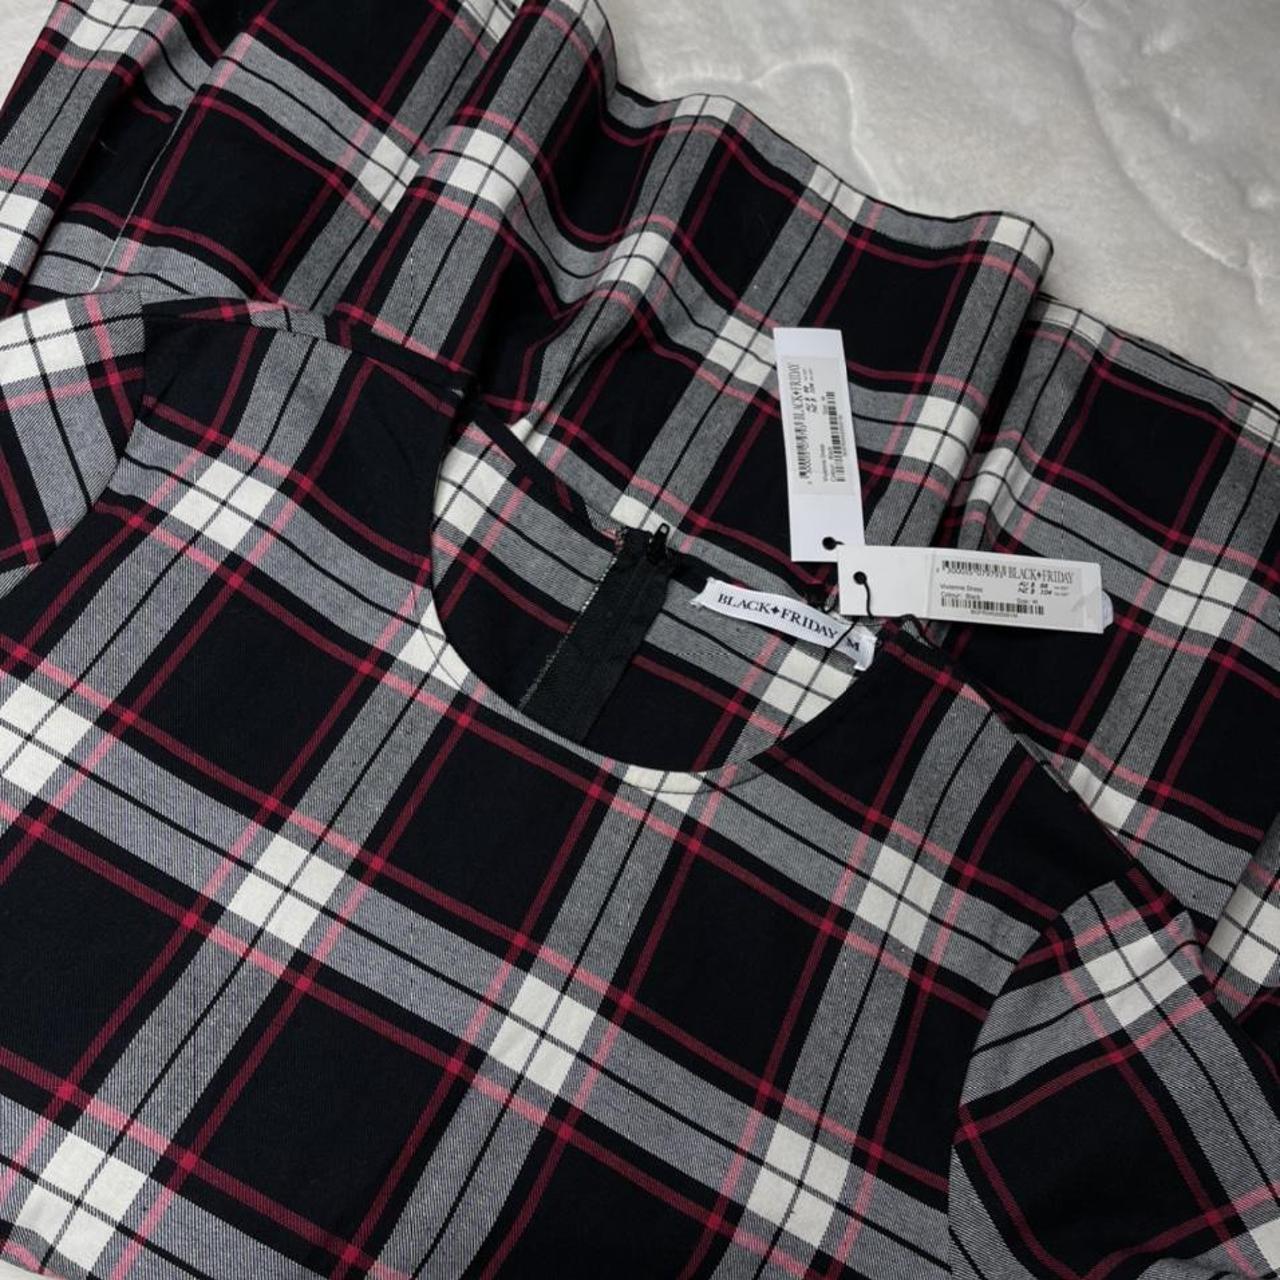 Product Image 1 - Dangerfield Black Friday plaid dress
New,